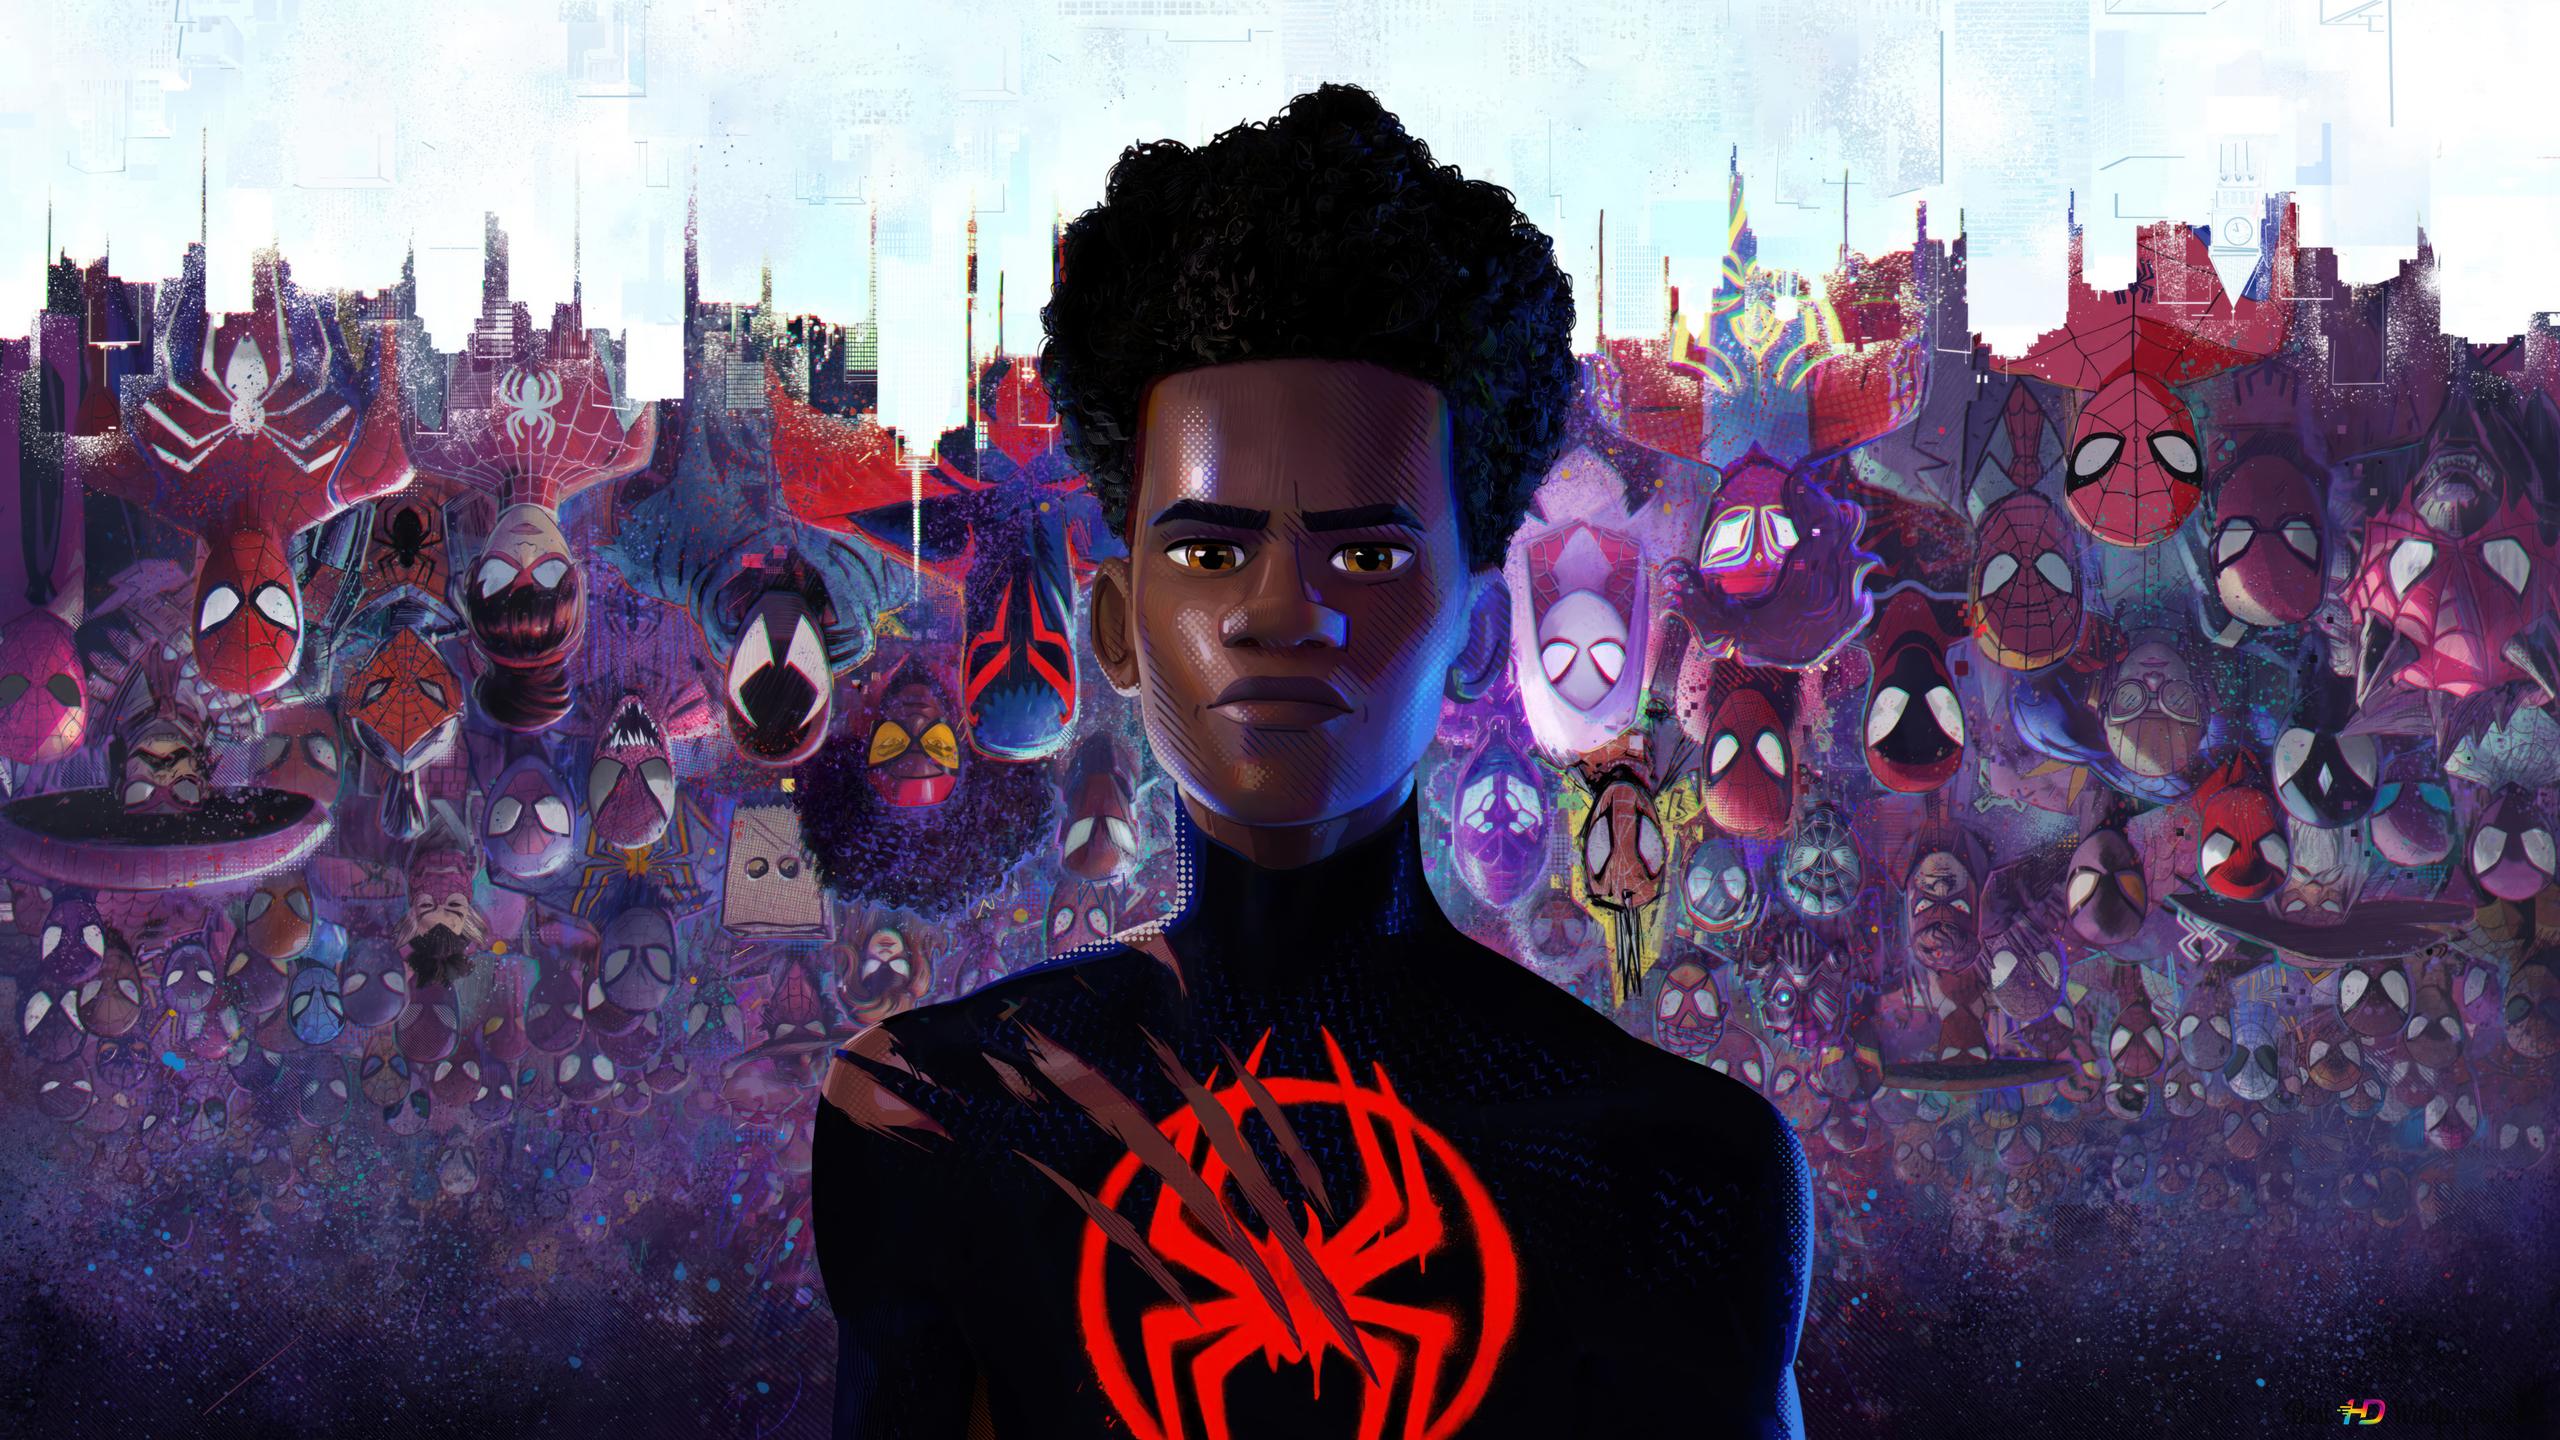 Given What We Know, What Are Your Predictions For Beyond The Spider Verse? How Do You Think Everything Is Going To Get Wrapped Up?